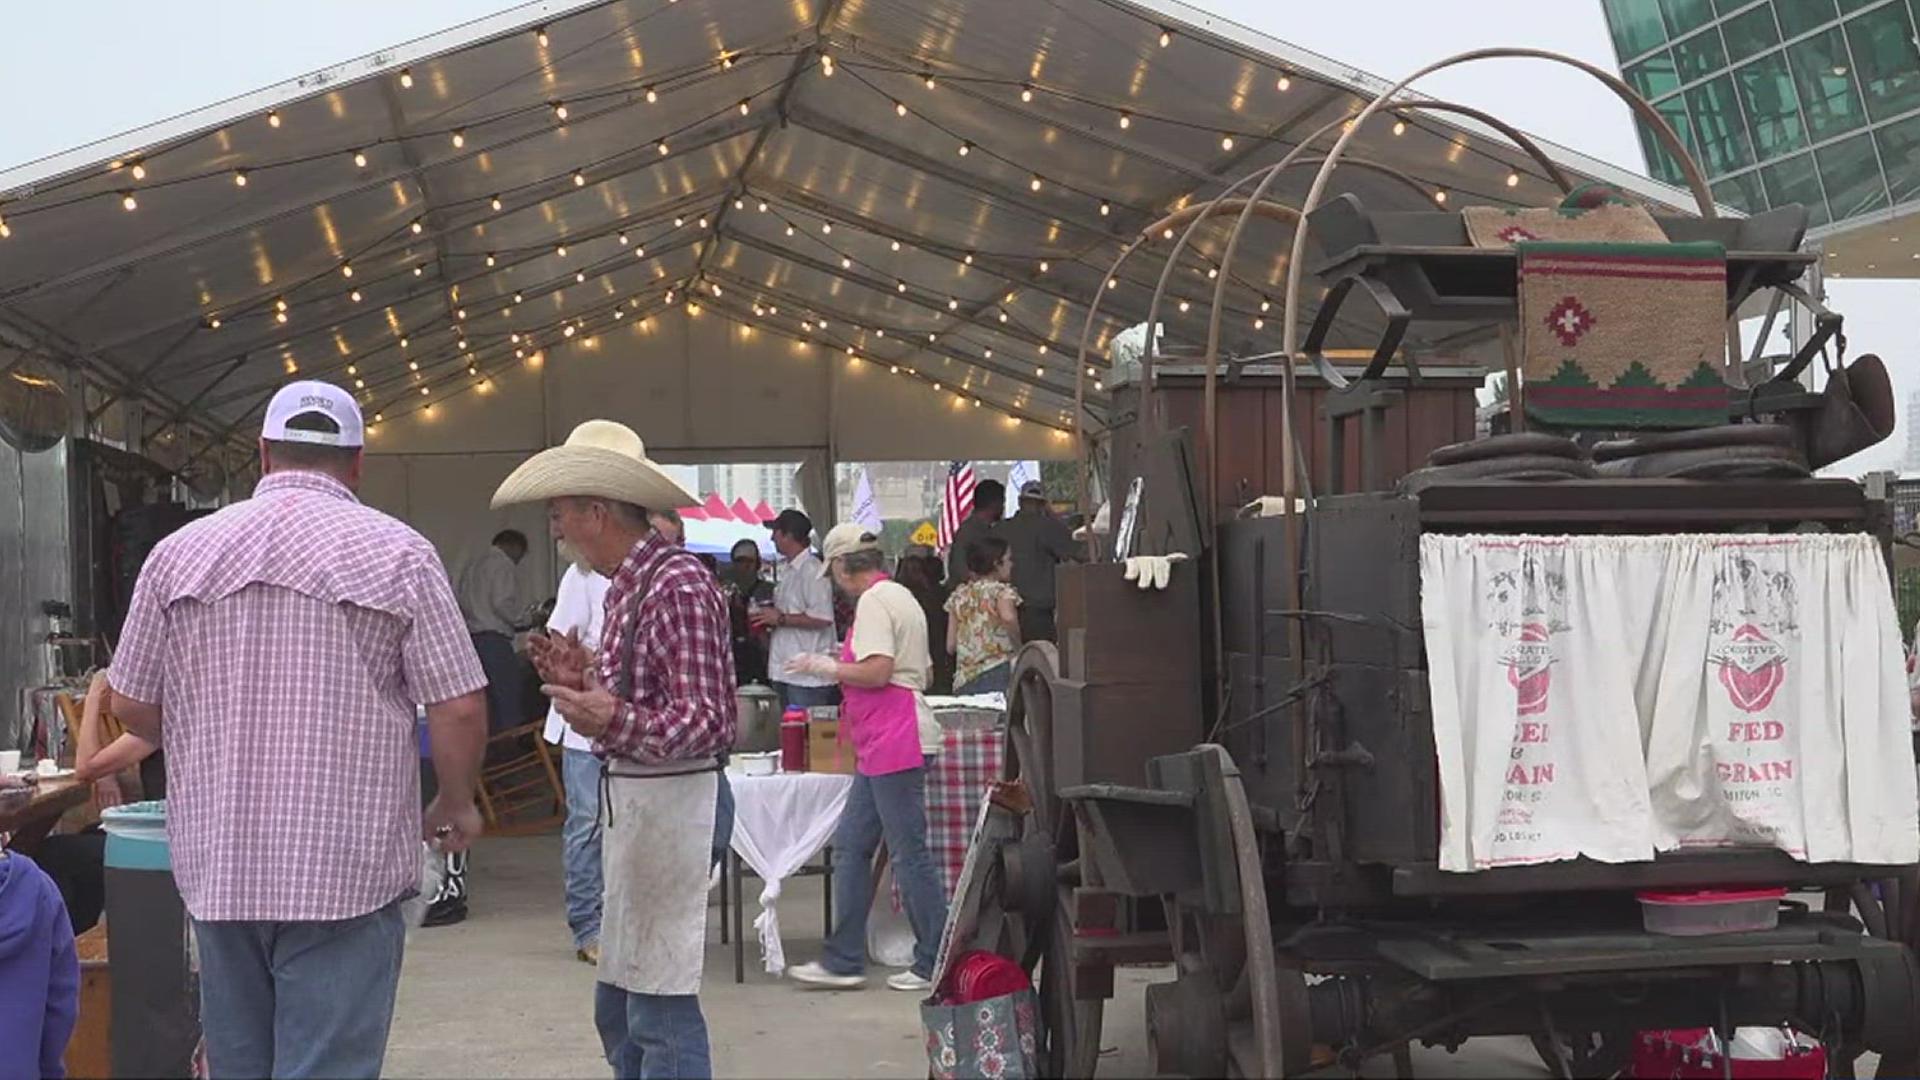 The breakfast was held to thank volunteers, sponsors and community before the first day of the rodeo Tuesday night.